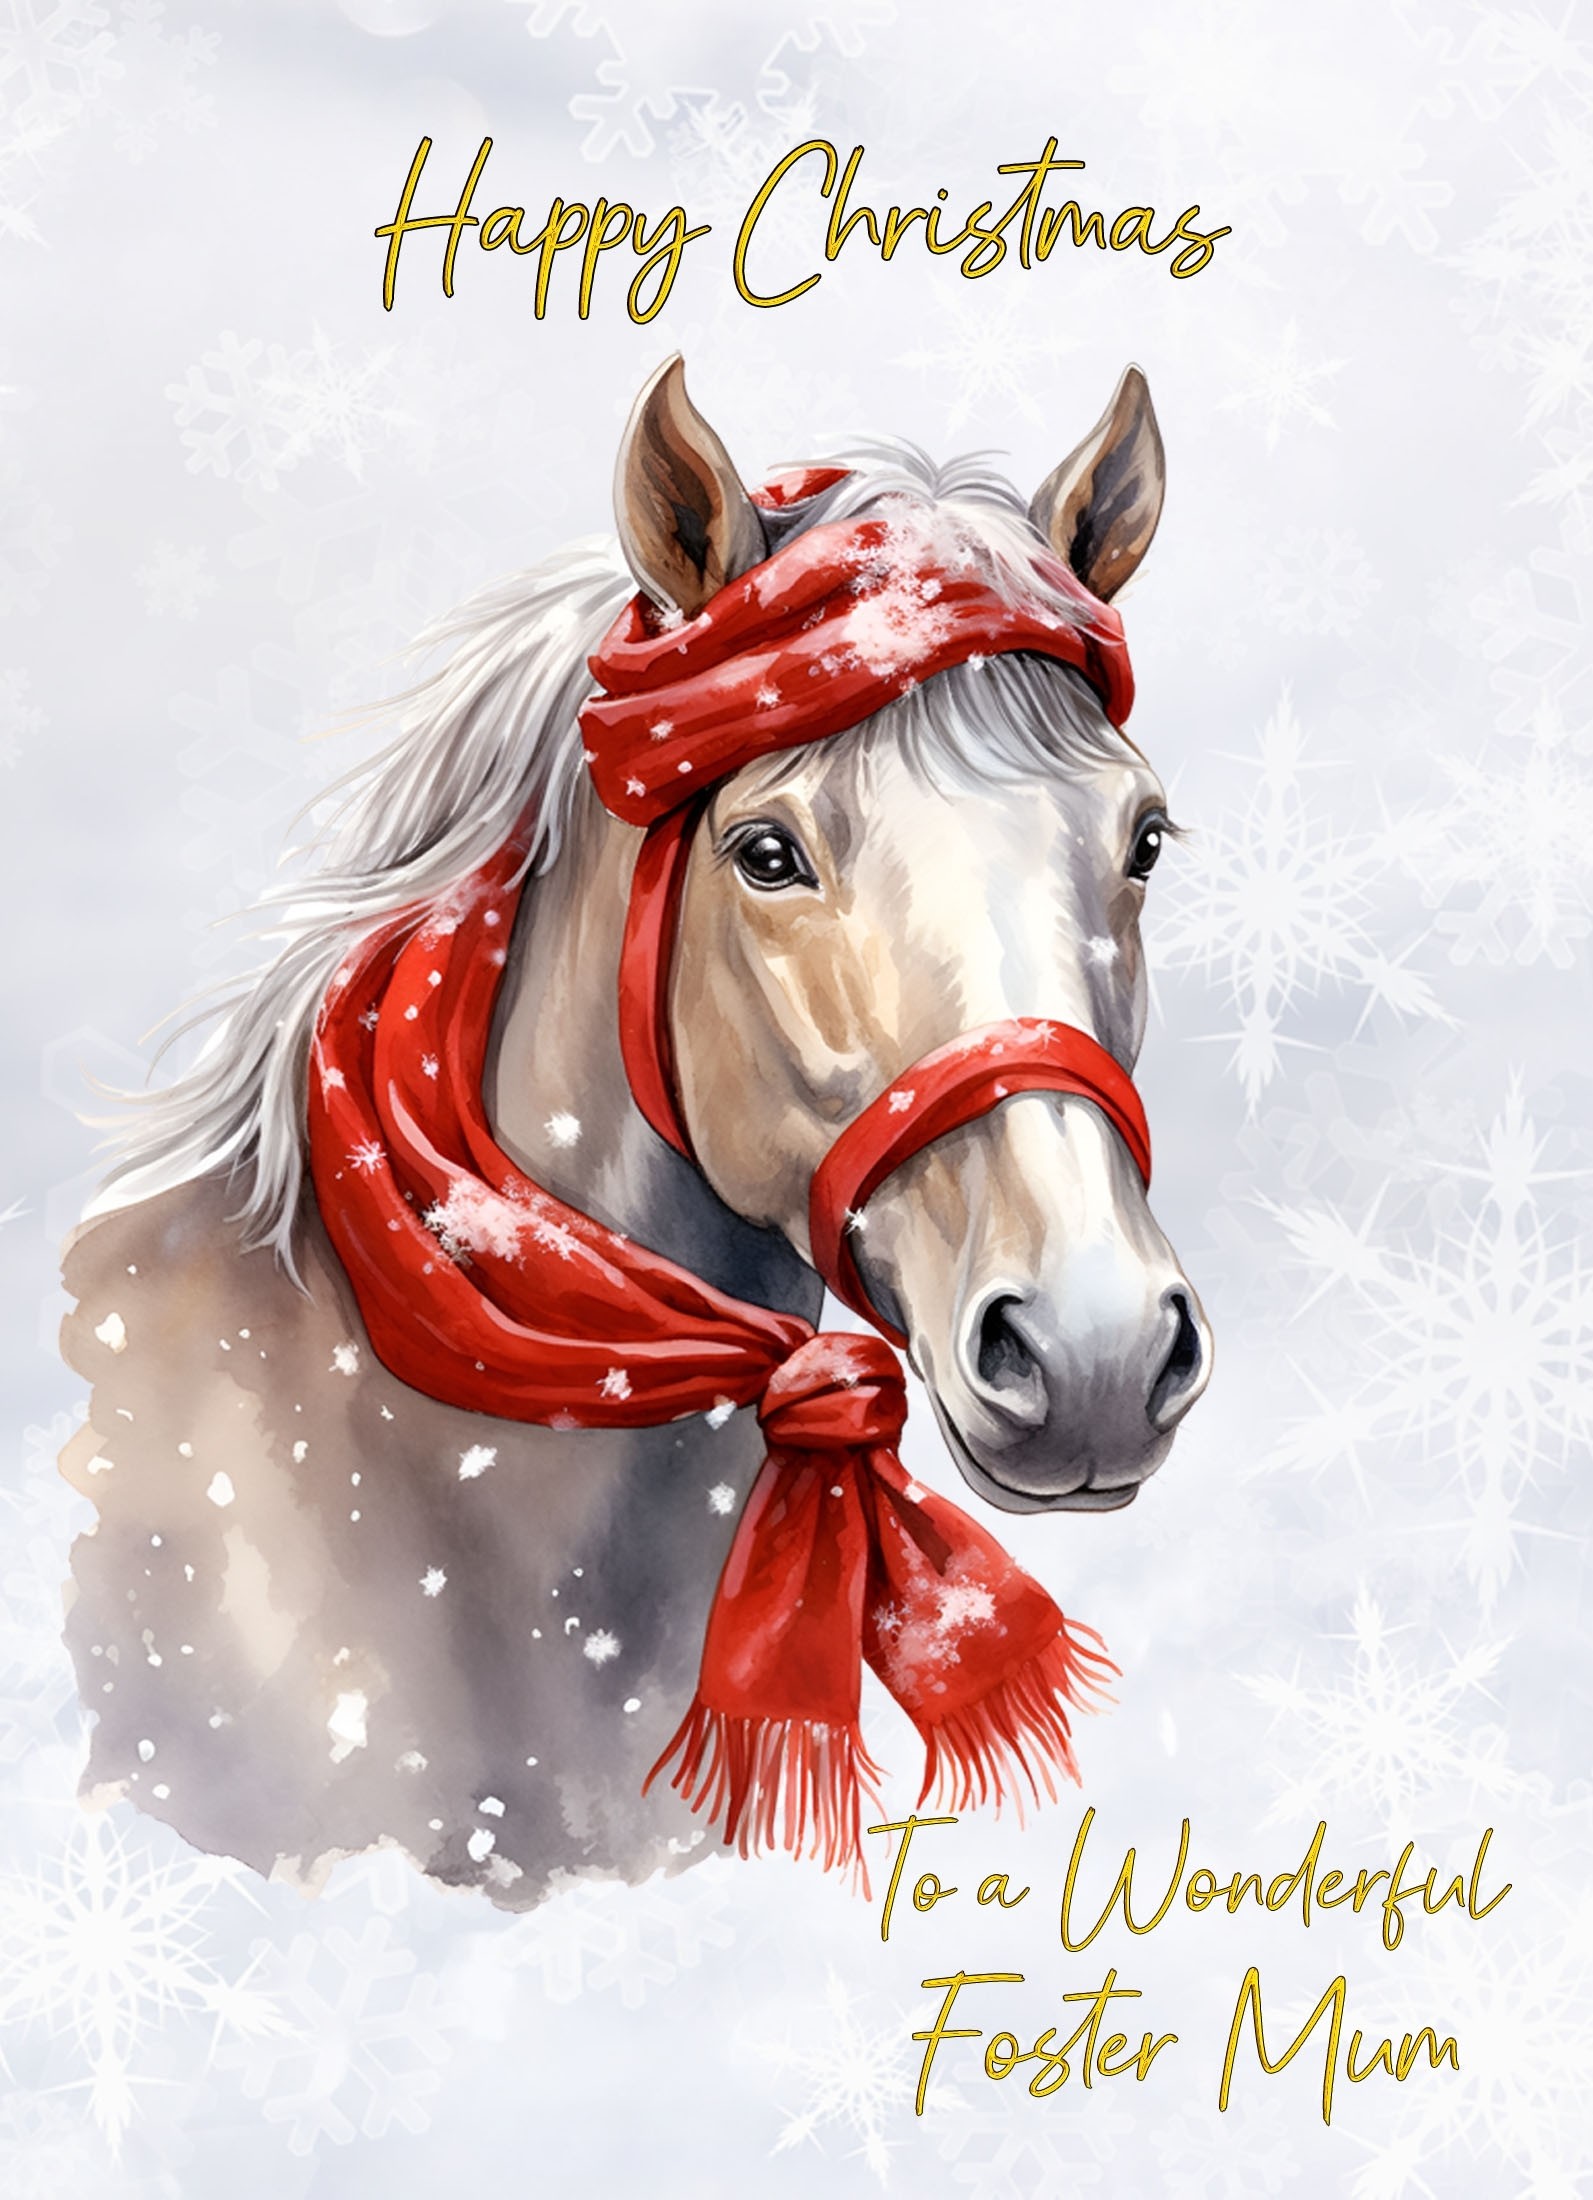 Christmas Card For Foster Mum (Horse Art Red)